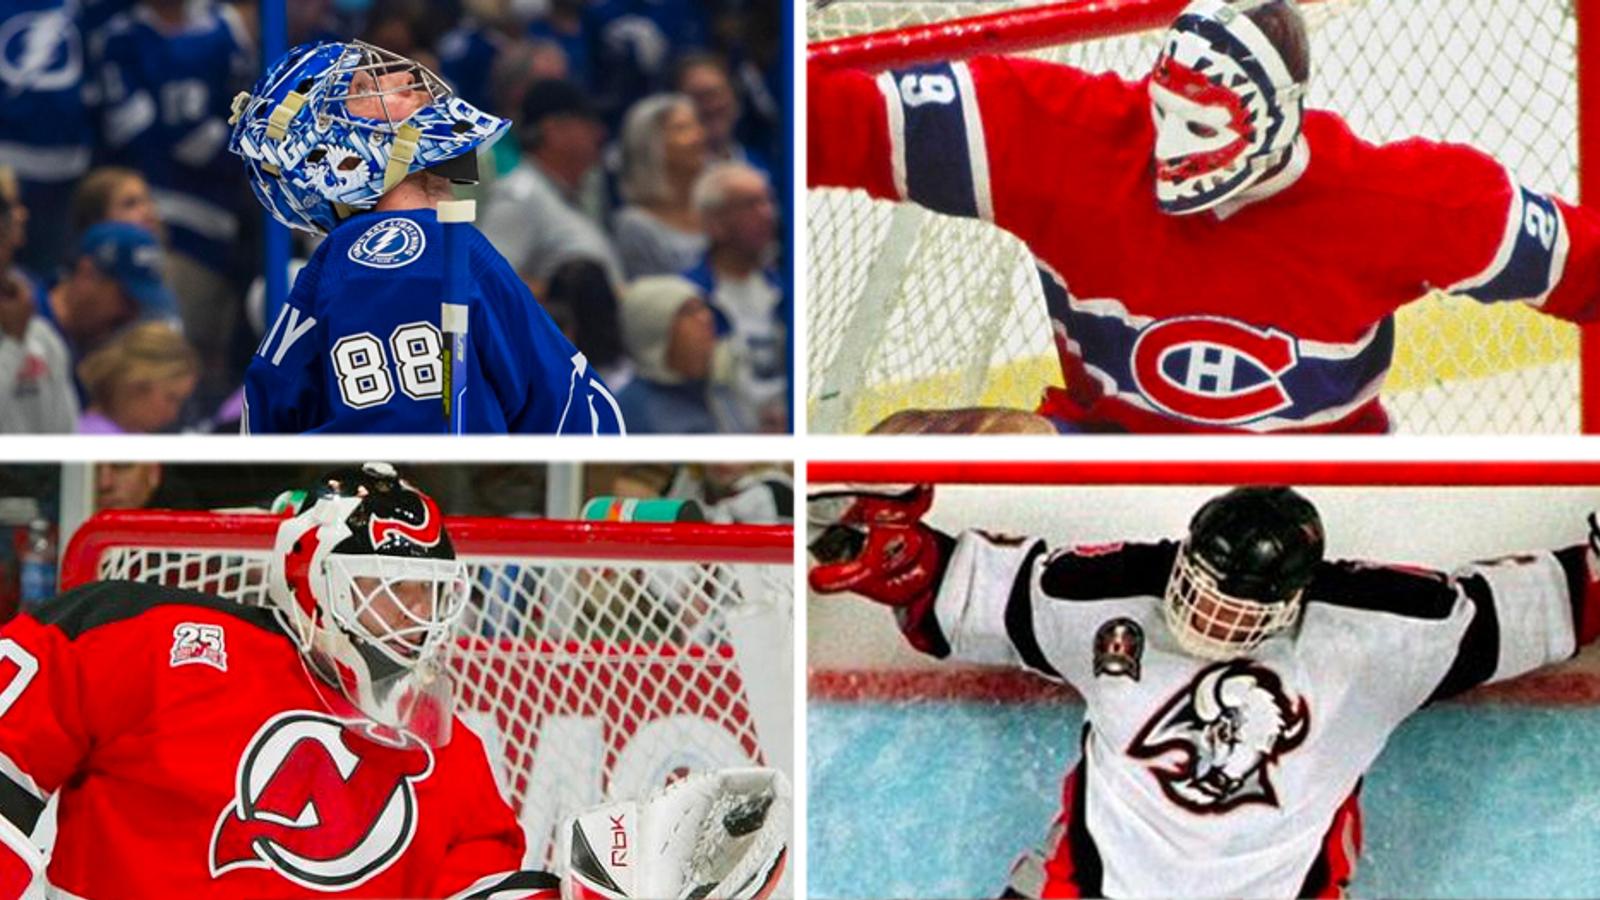 Brodeur, Dryden and Hasek all give credit to Vasilevsky as “one of the all-time greats”